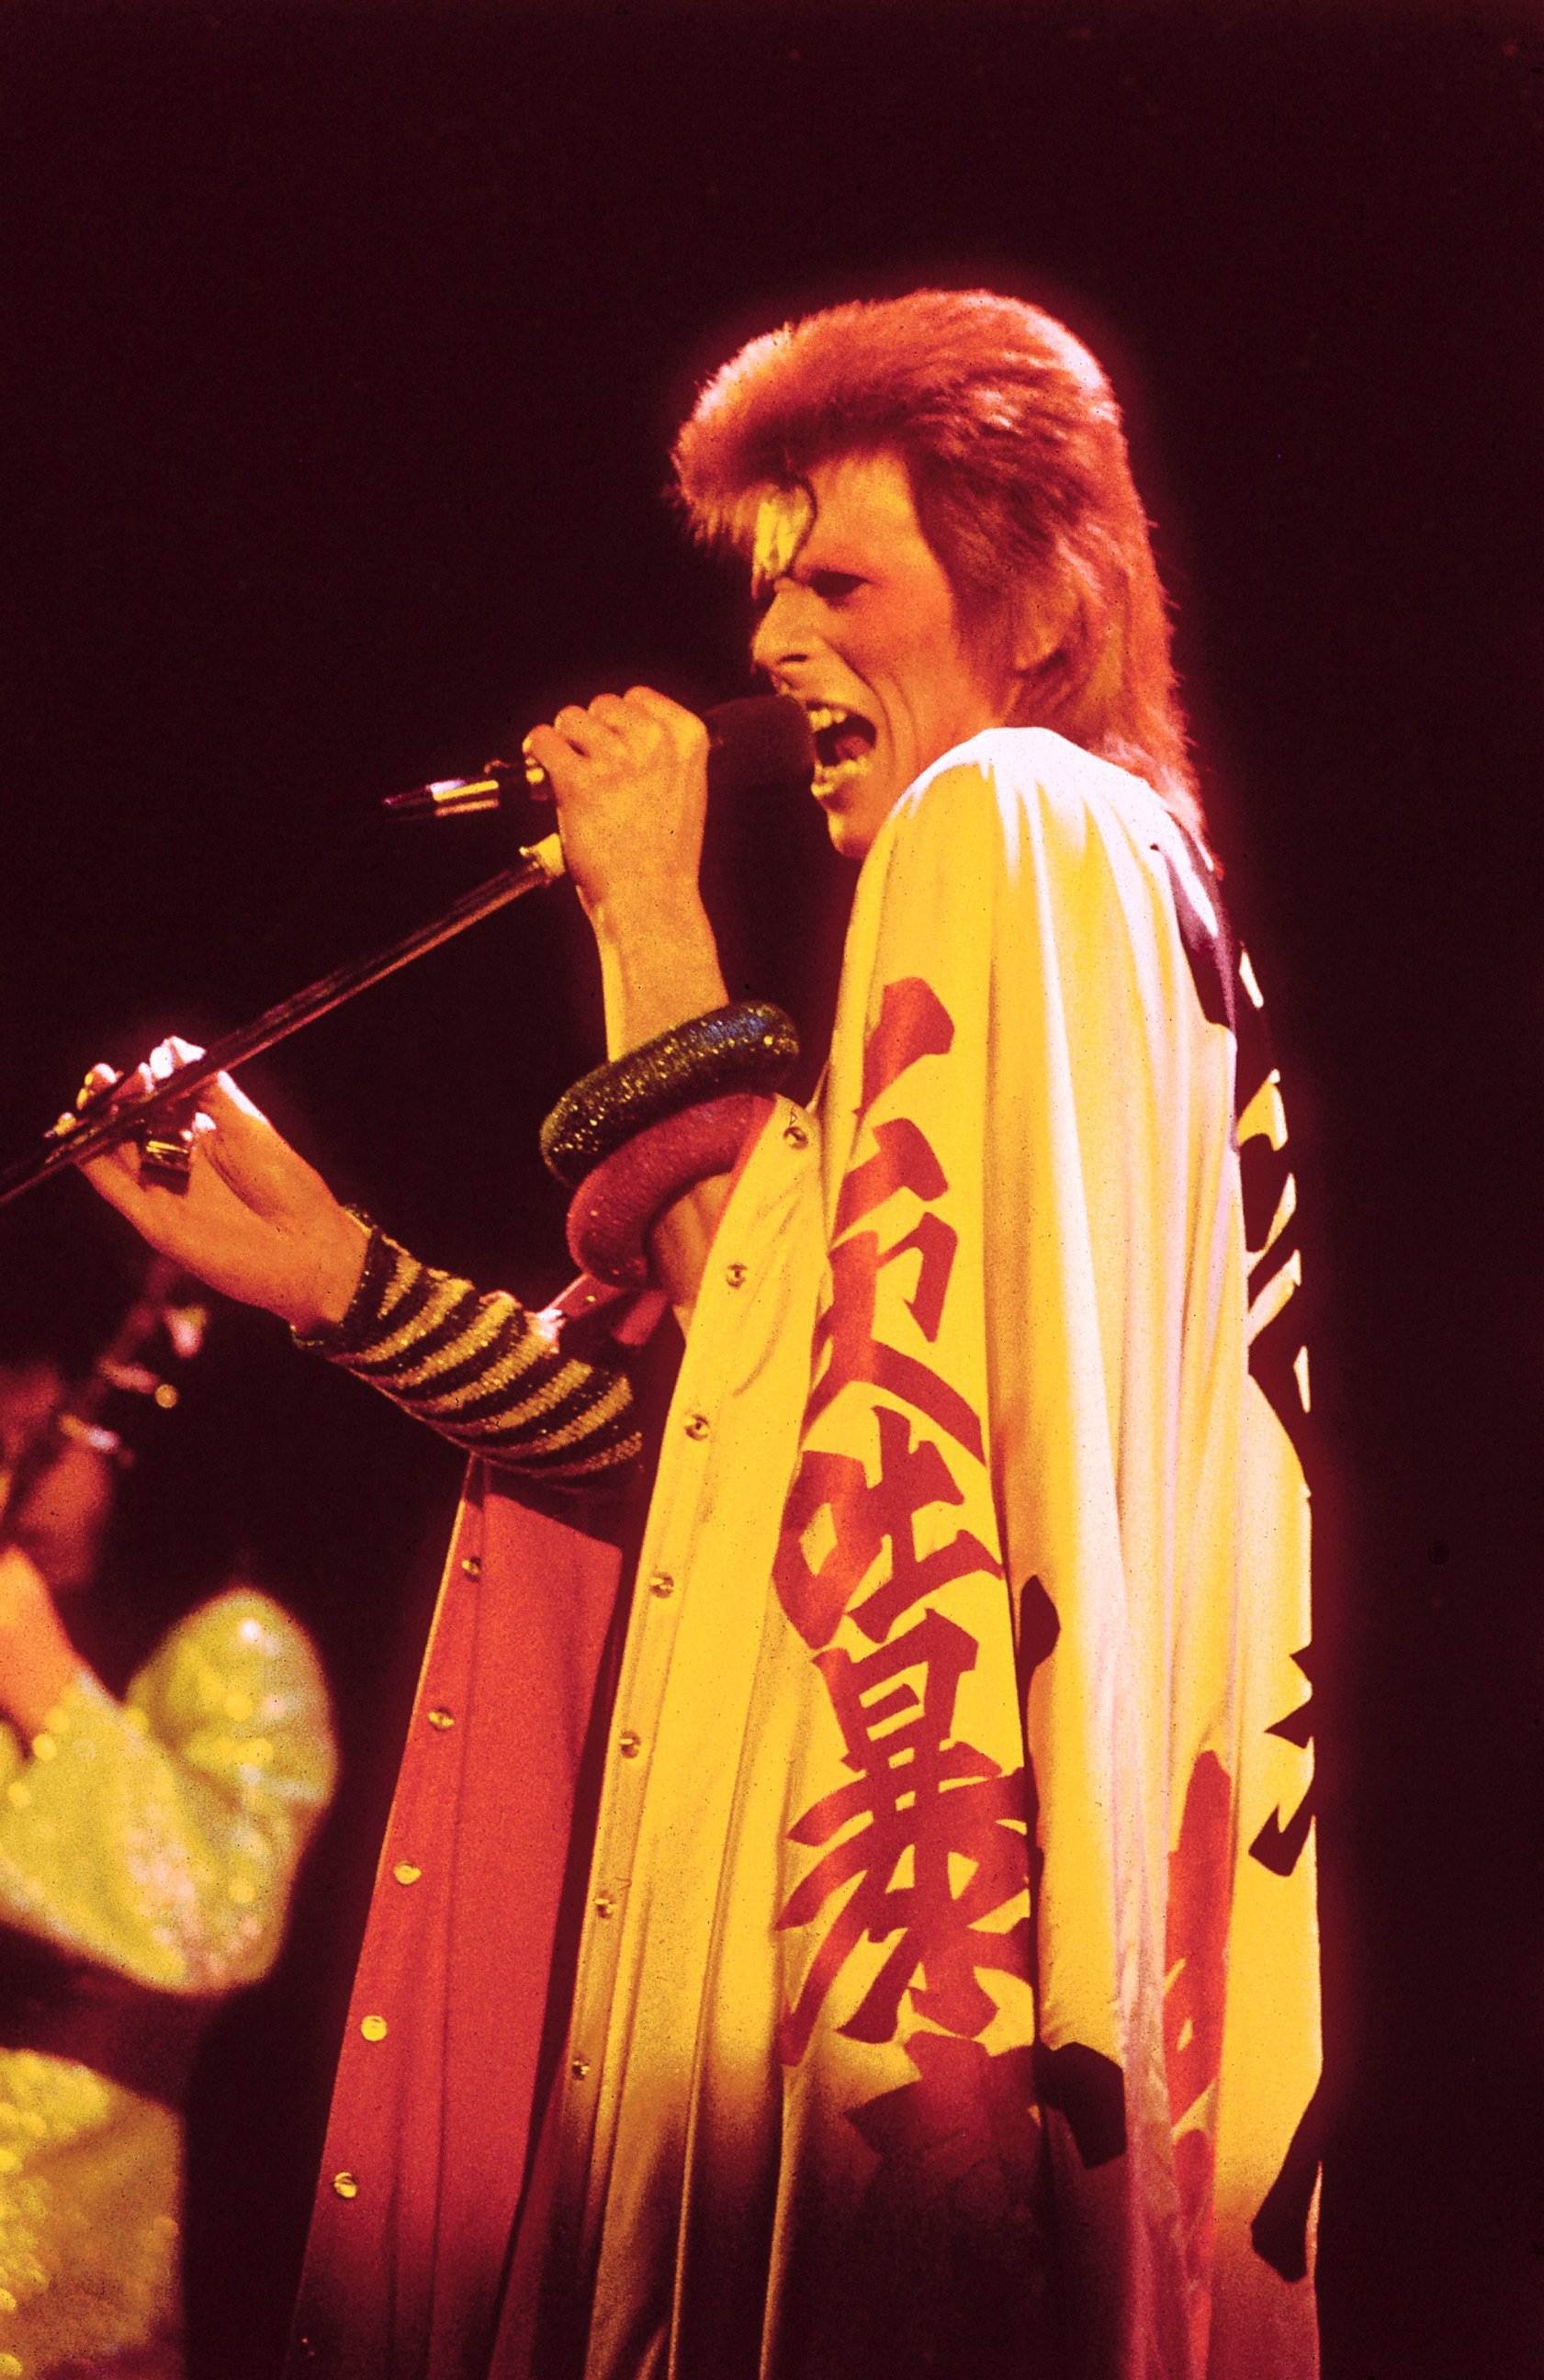 PHOTO: David Bowie performing live onstage at final Ziggy Stardust concert, July 3, 1973 in London. 